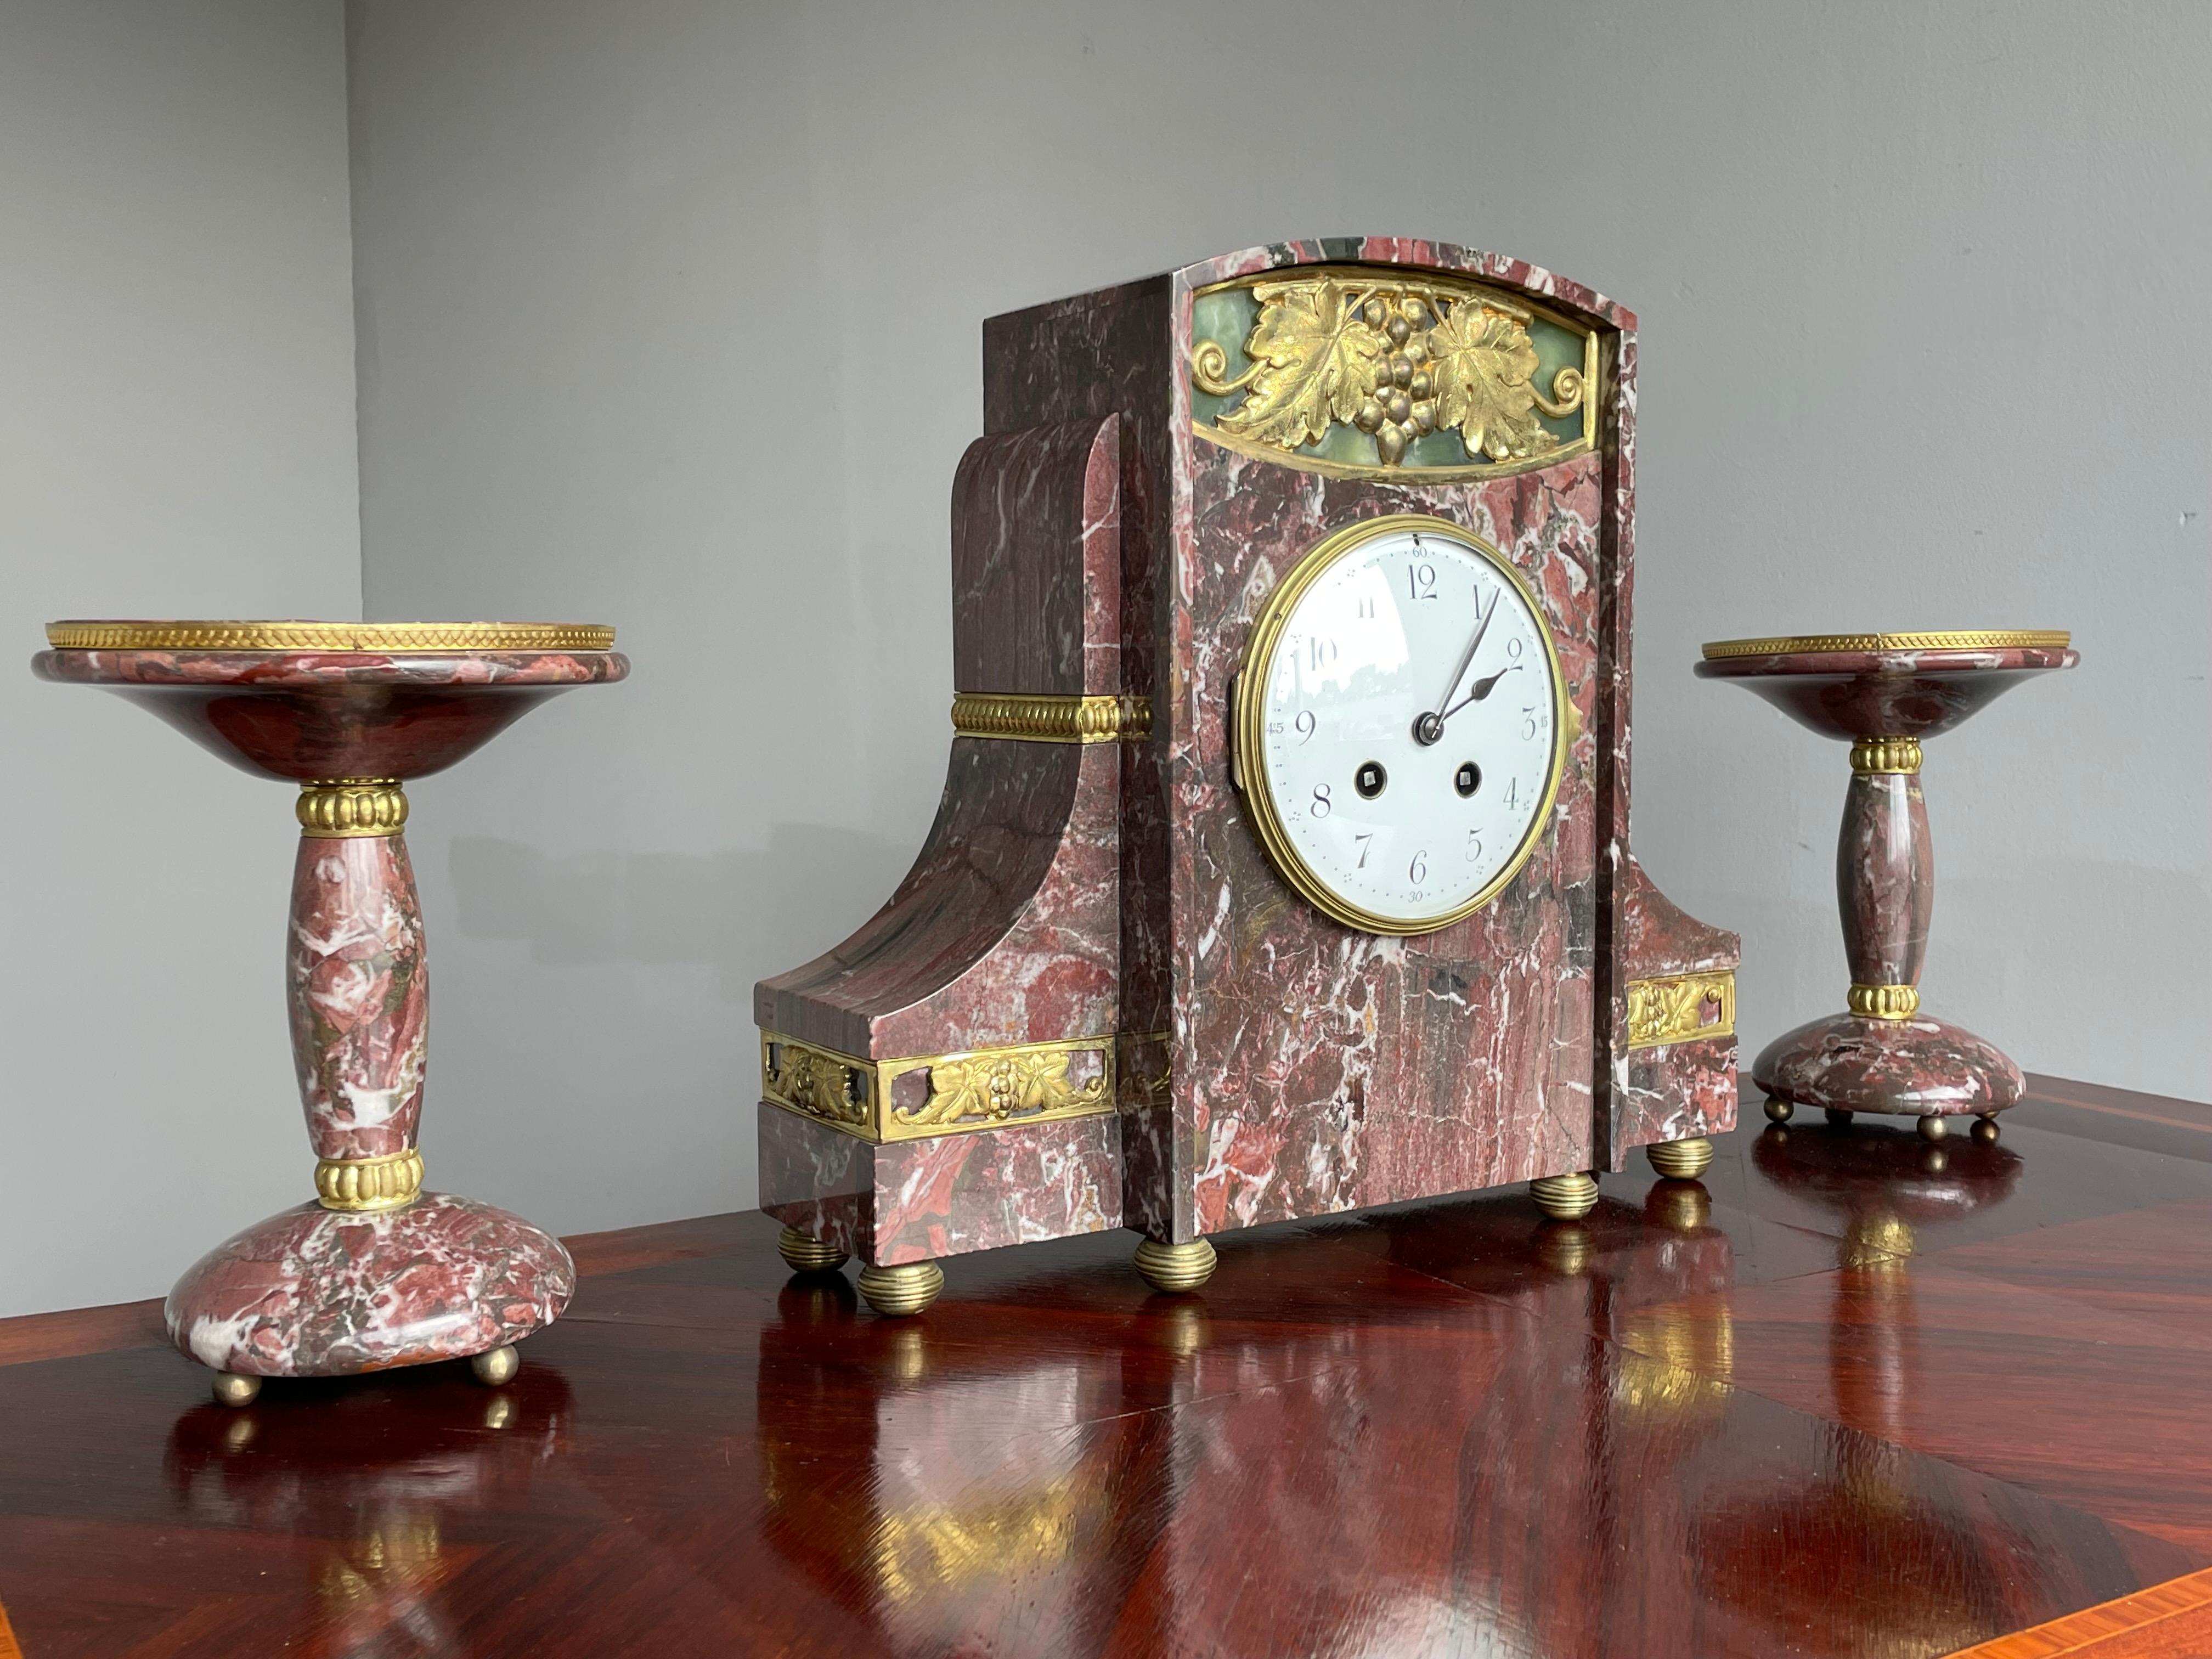 Stunning marble clock with gilt wine leafs, grape bunch and more.

To us, this French antique clock epitomizes everything the Art Deco period stood for. Firstly, it ofcourse is no coincidence that the artist chose grape leafs and a grape bunch in